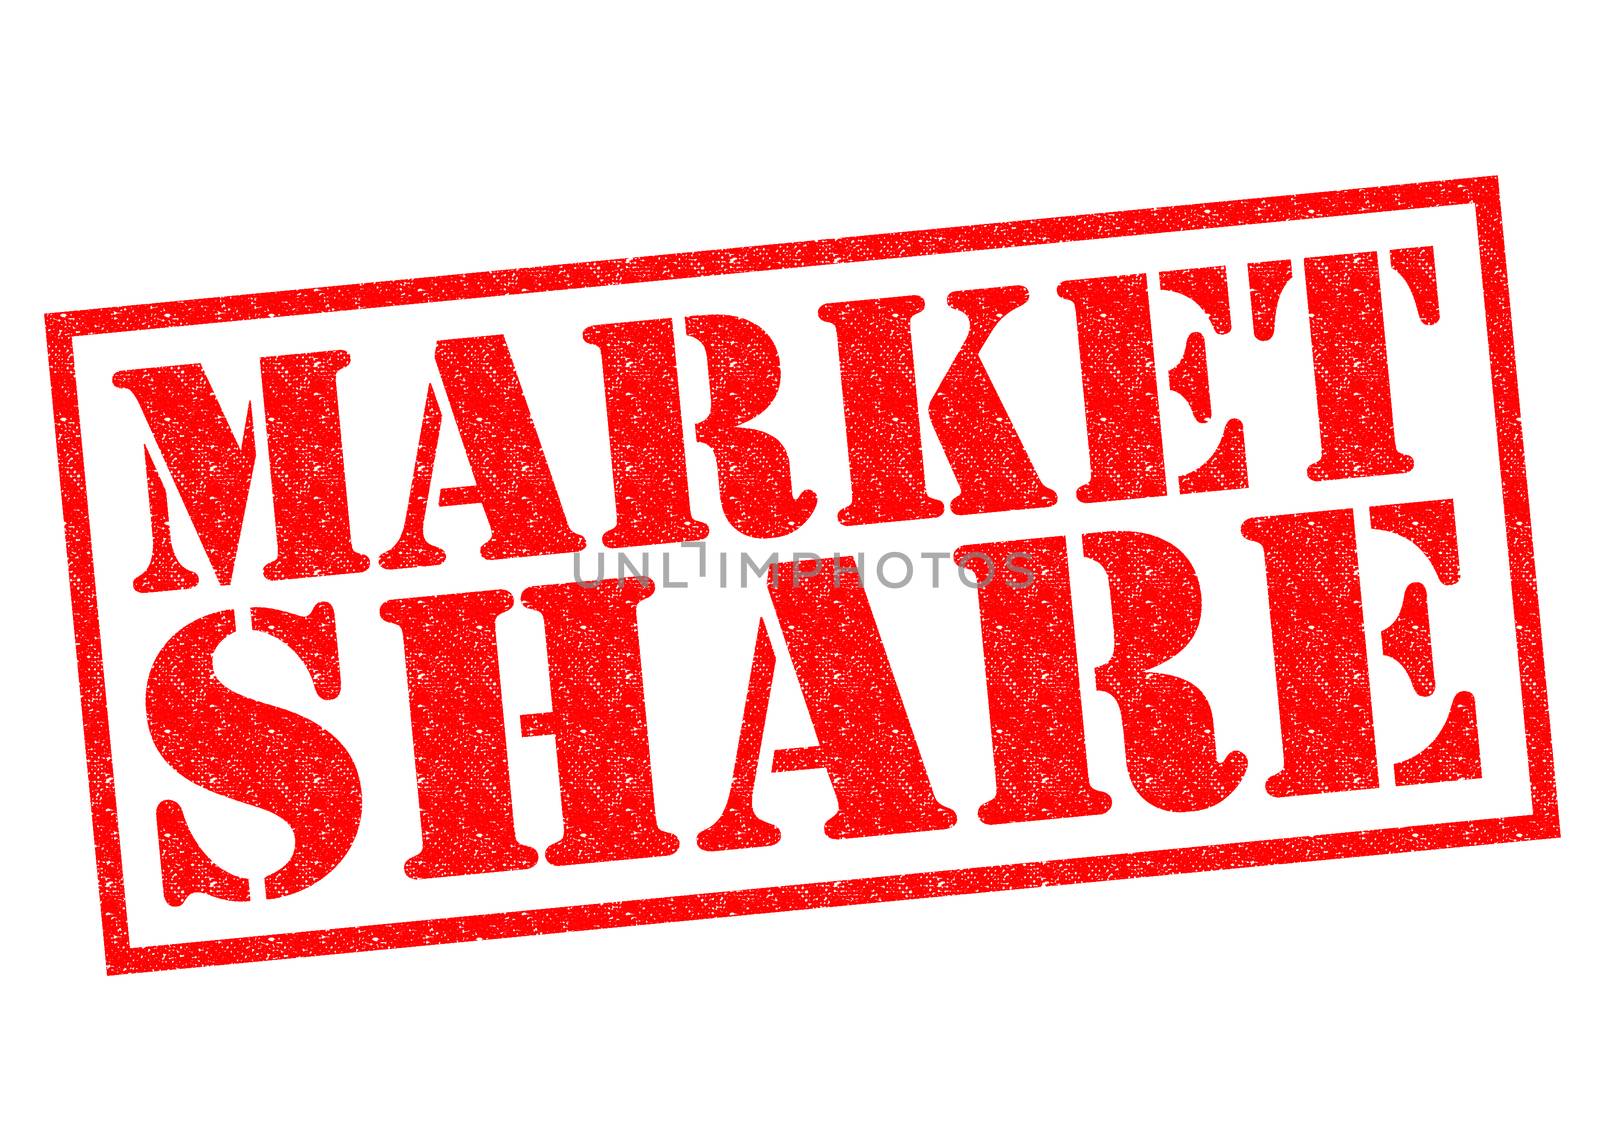 MARKET SHARE red Rubber Stamp over a white background.